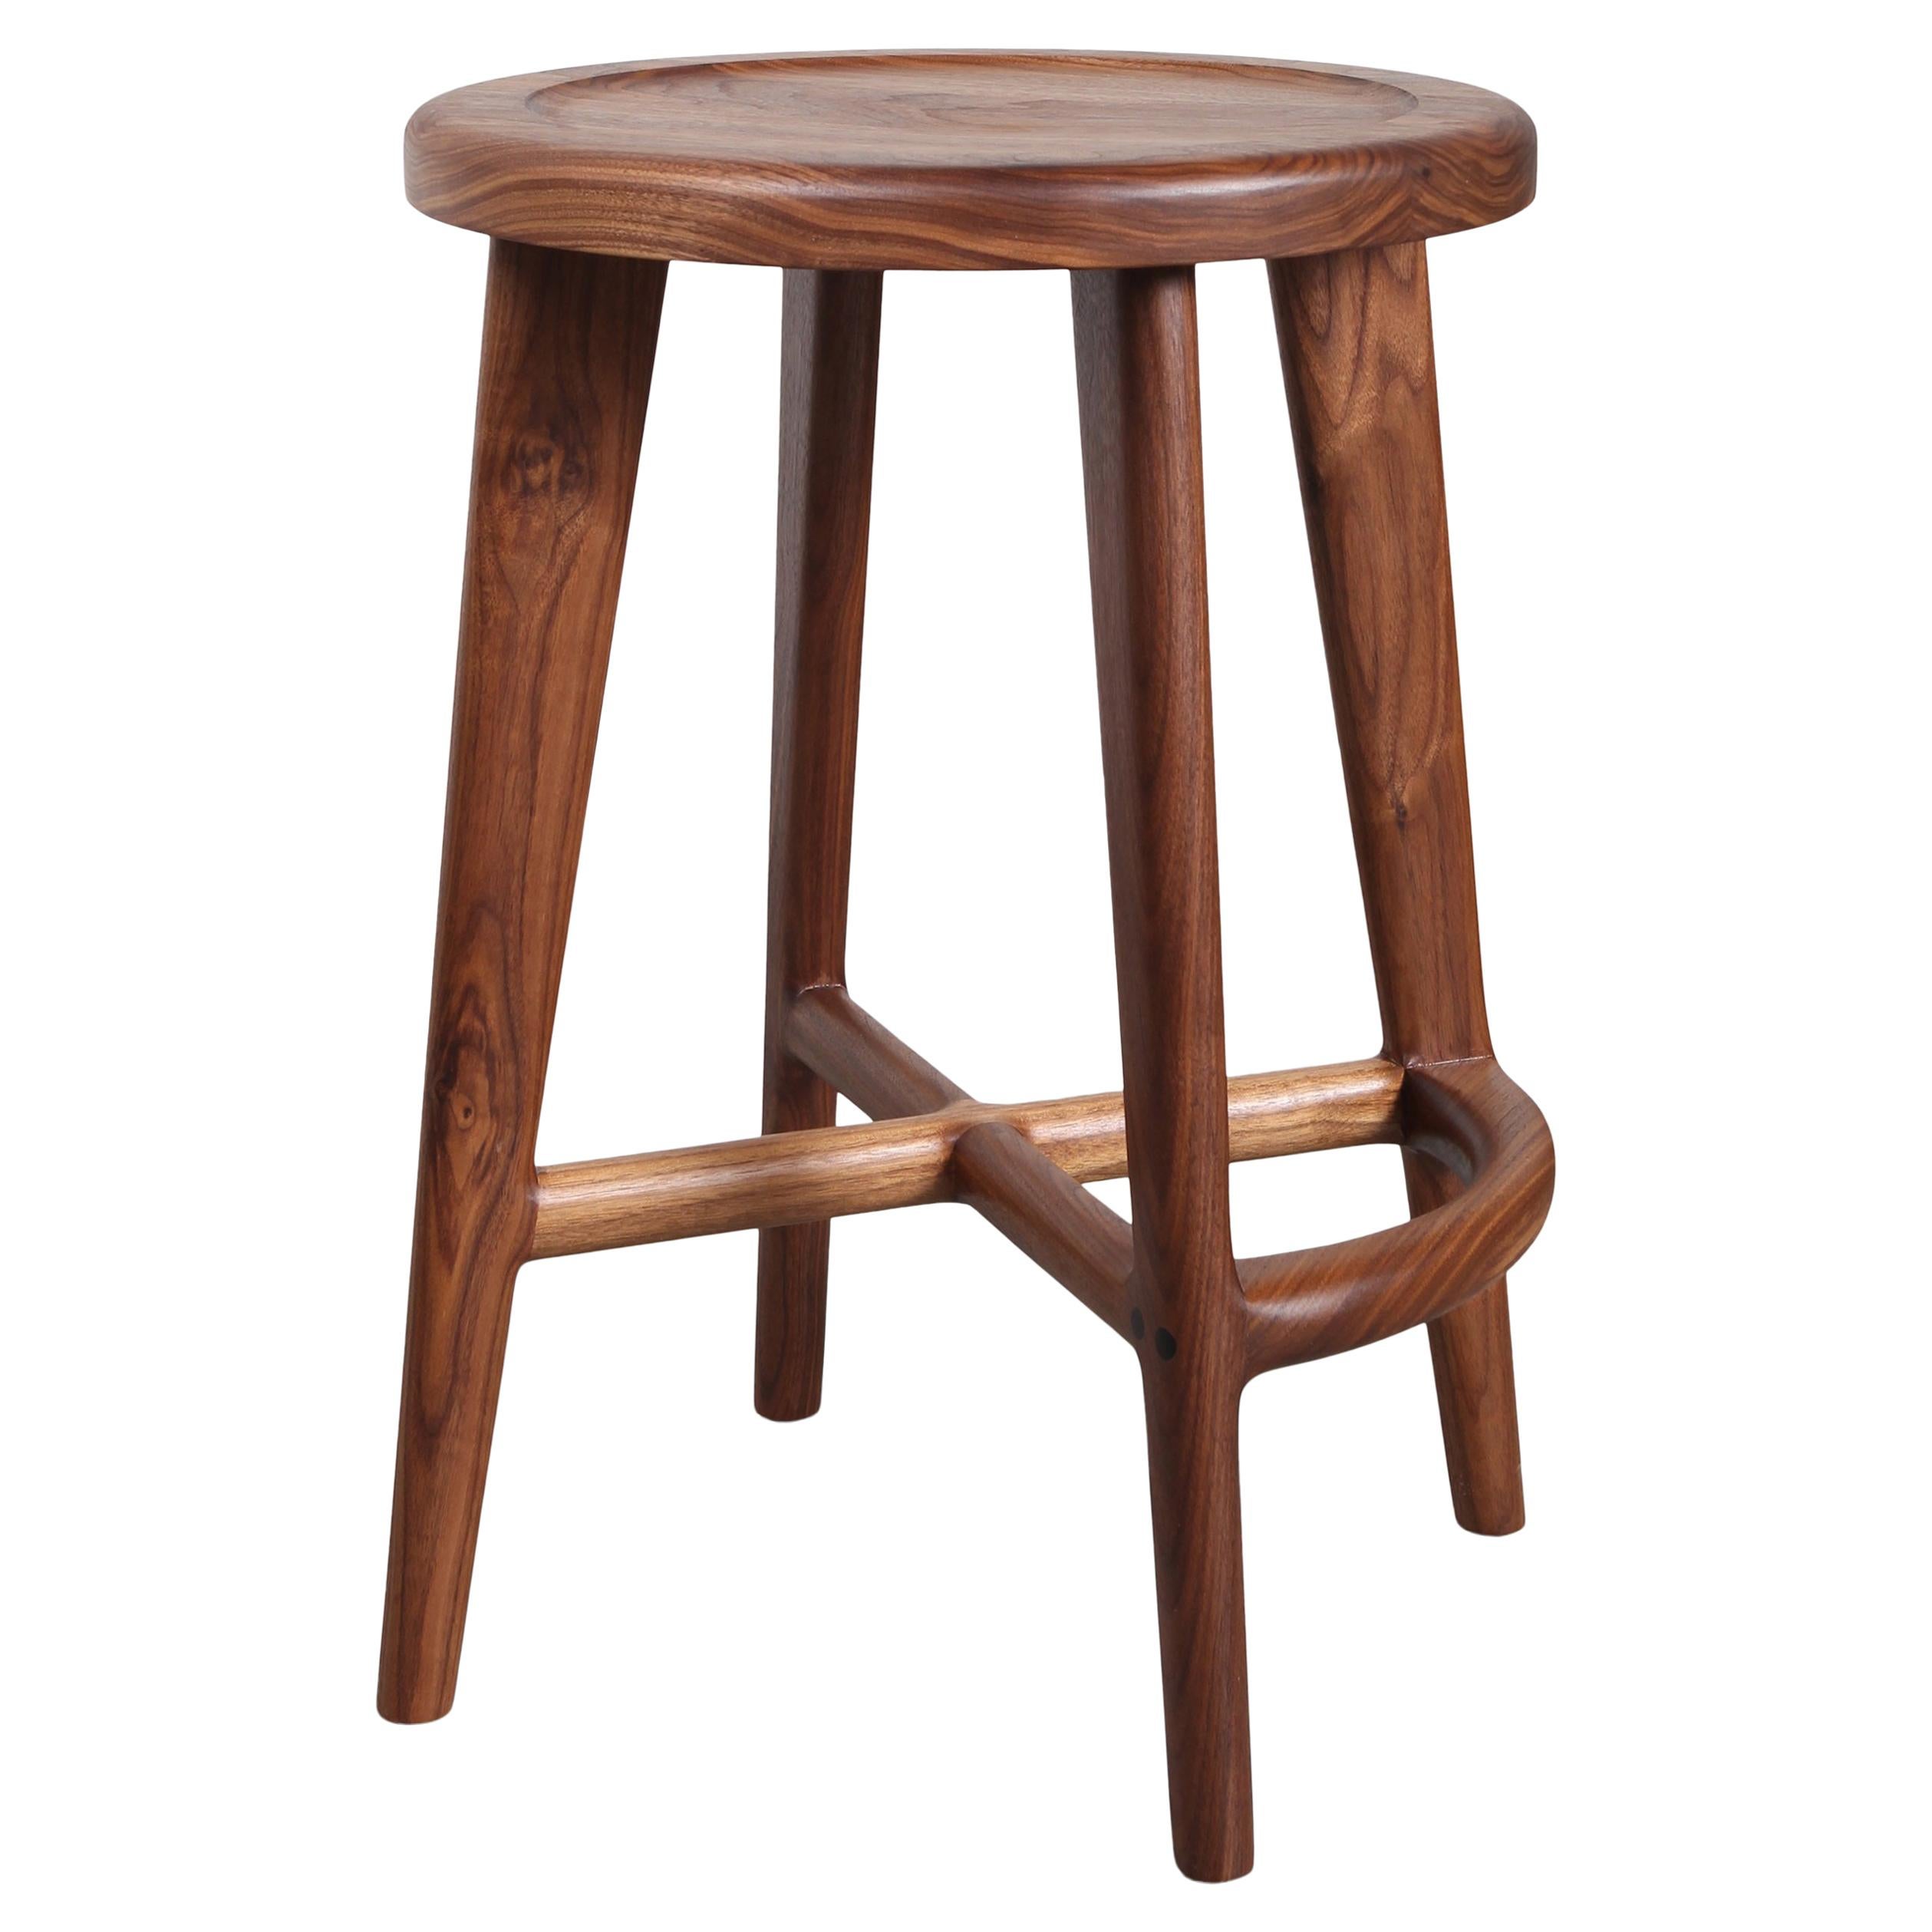 Handcrafted Solid Wood Bar Or Counter, Walnut Wood Bar Stools